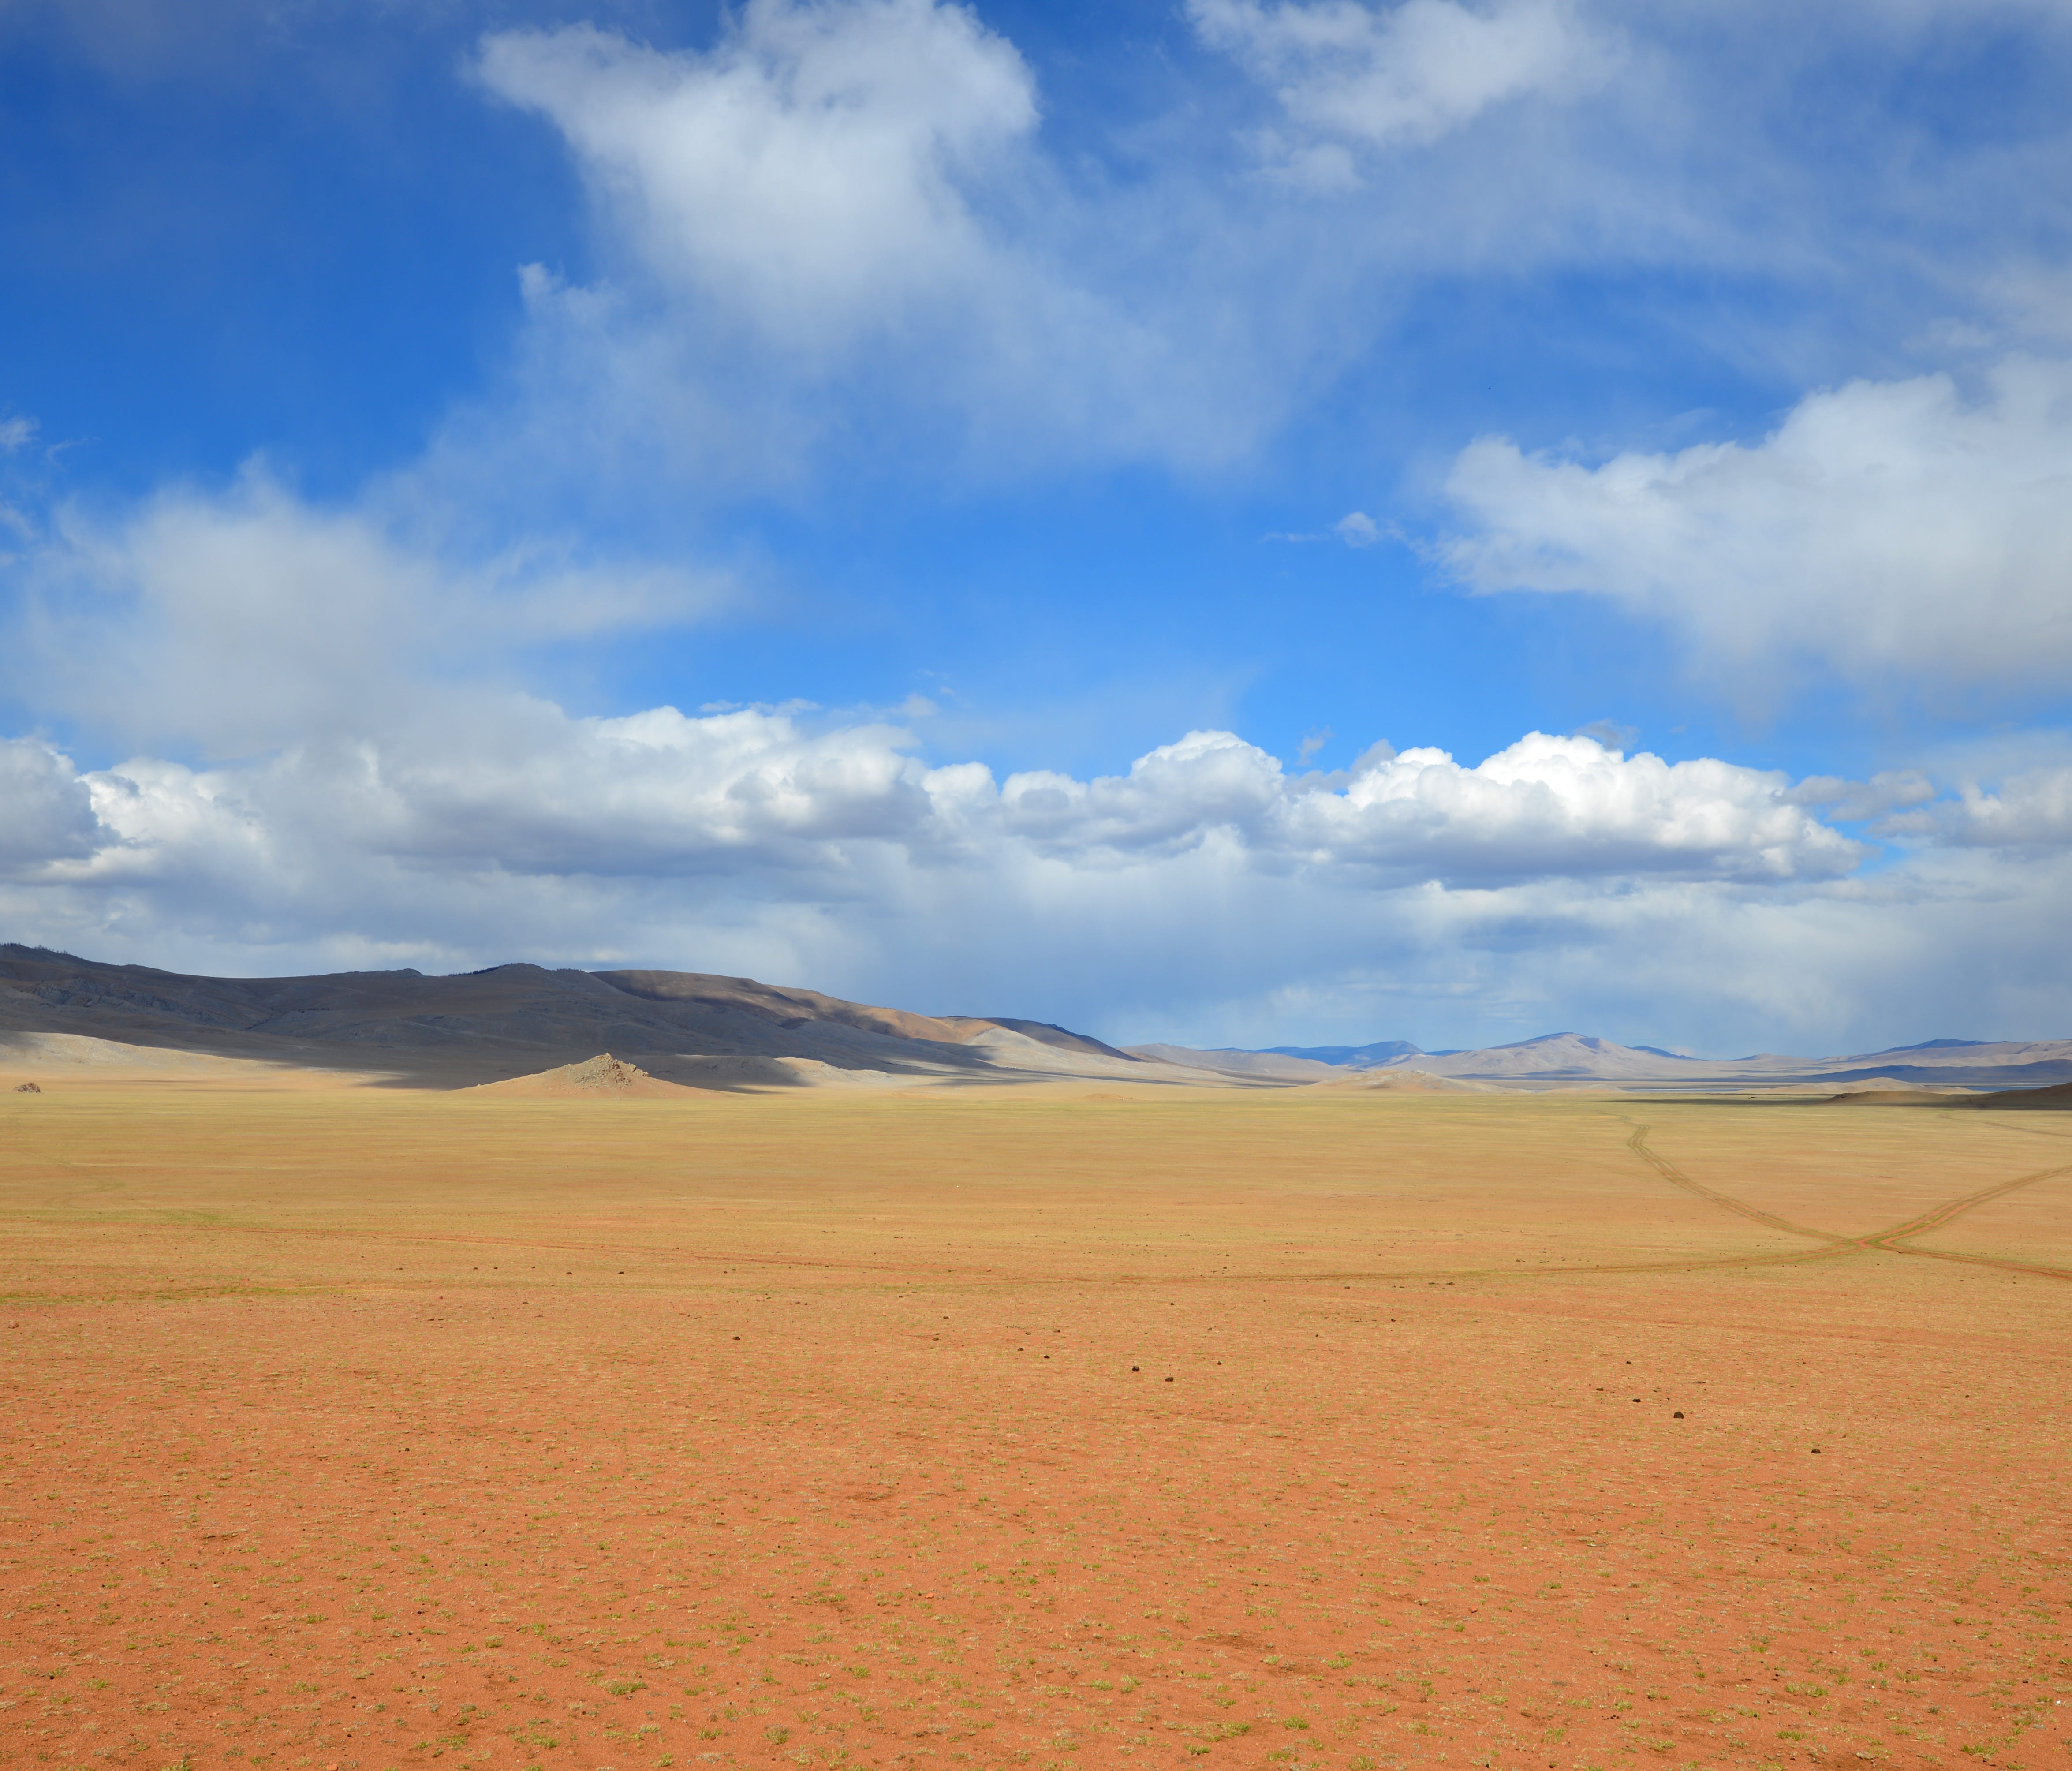 Thousands of square miles of Mongolia consists of sparsely populated, grassy steppe.